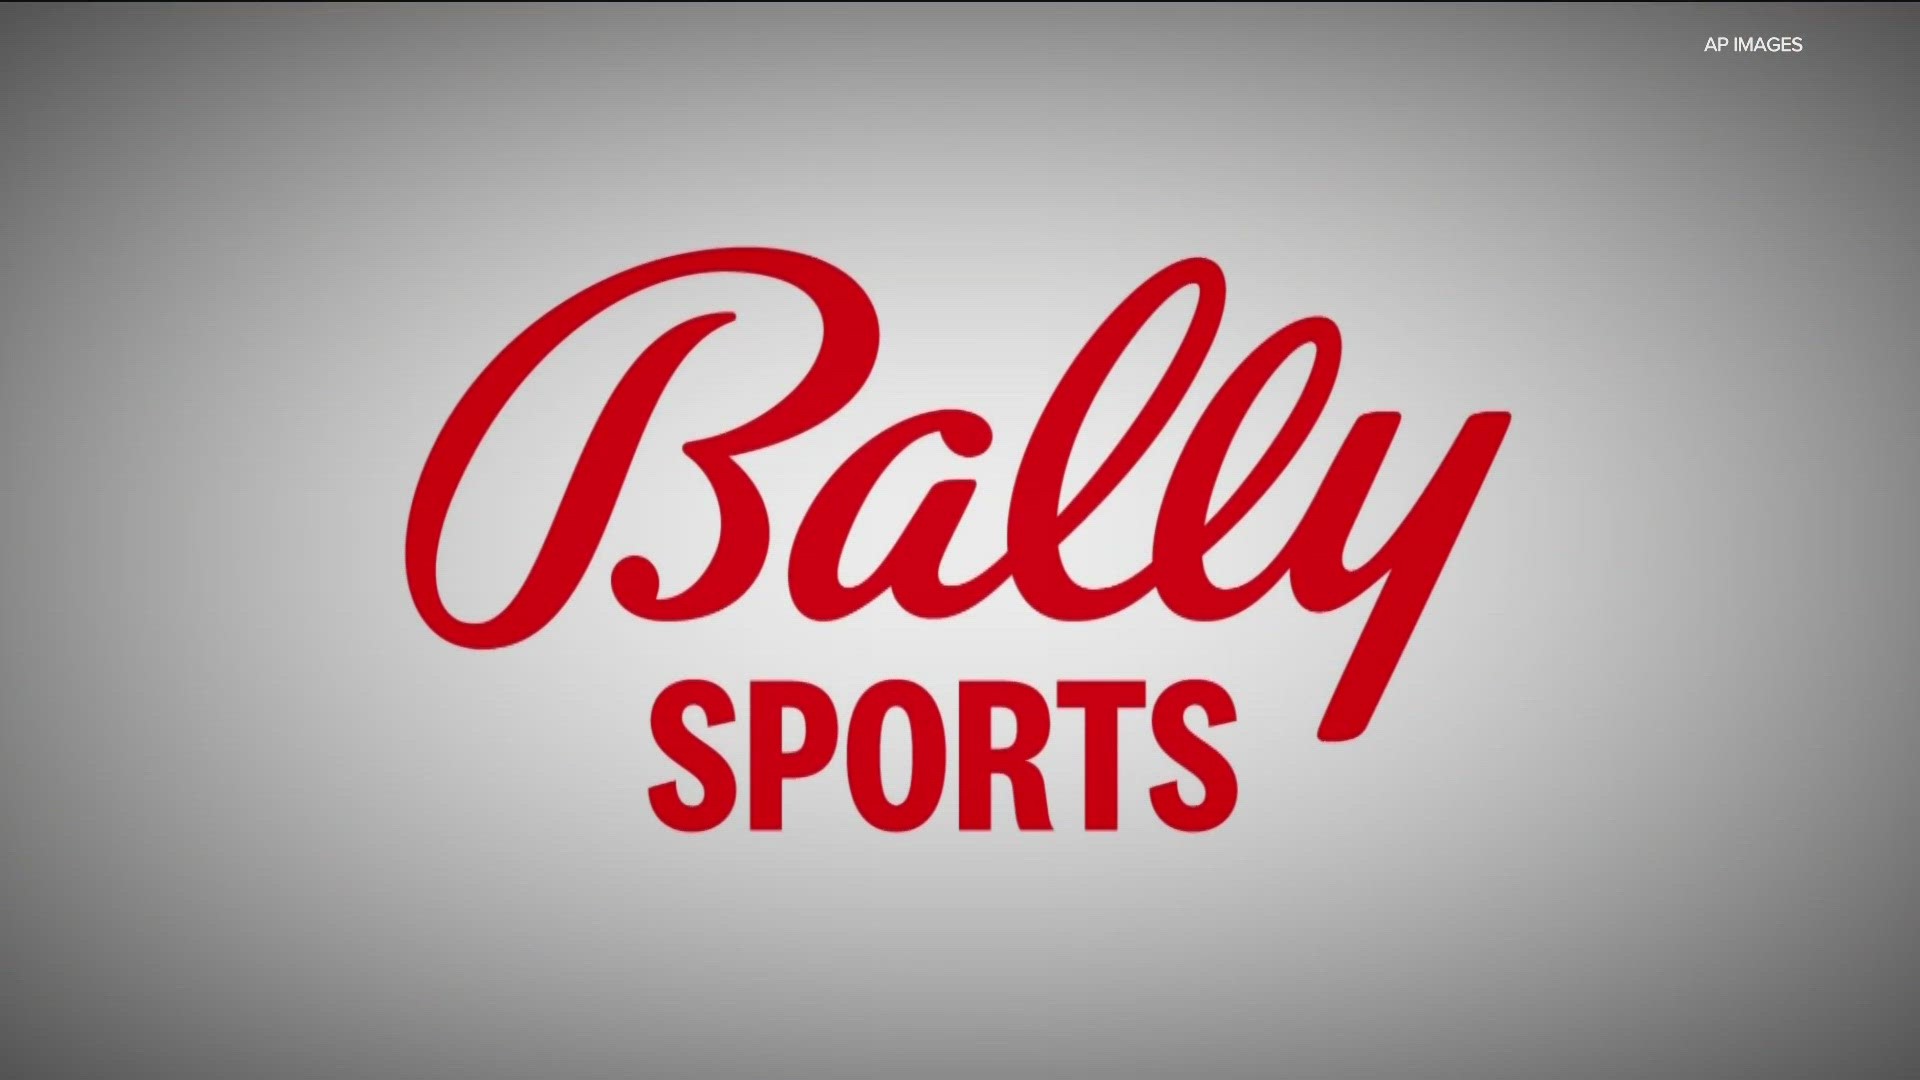 Deal with Amazon could help Diamond Sports, Bally survive | kare11.com